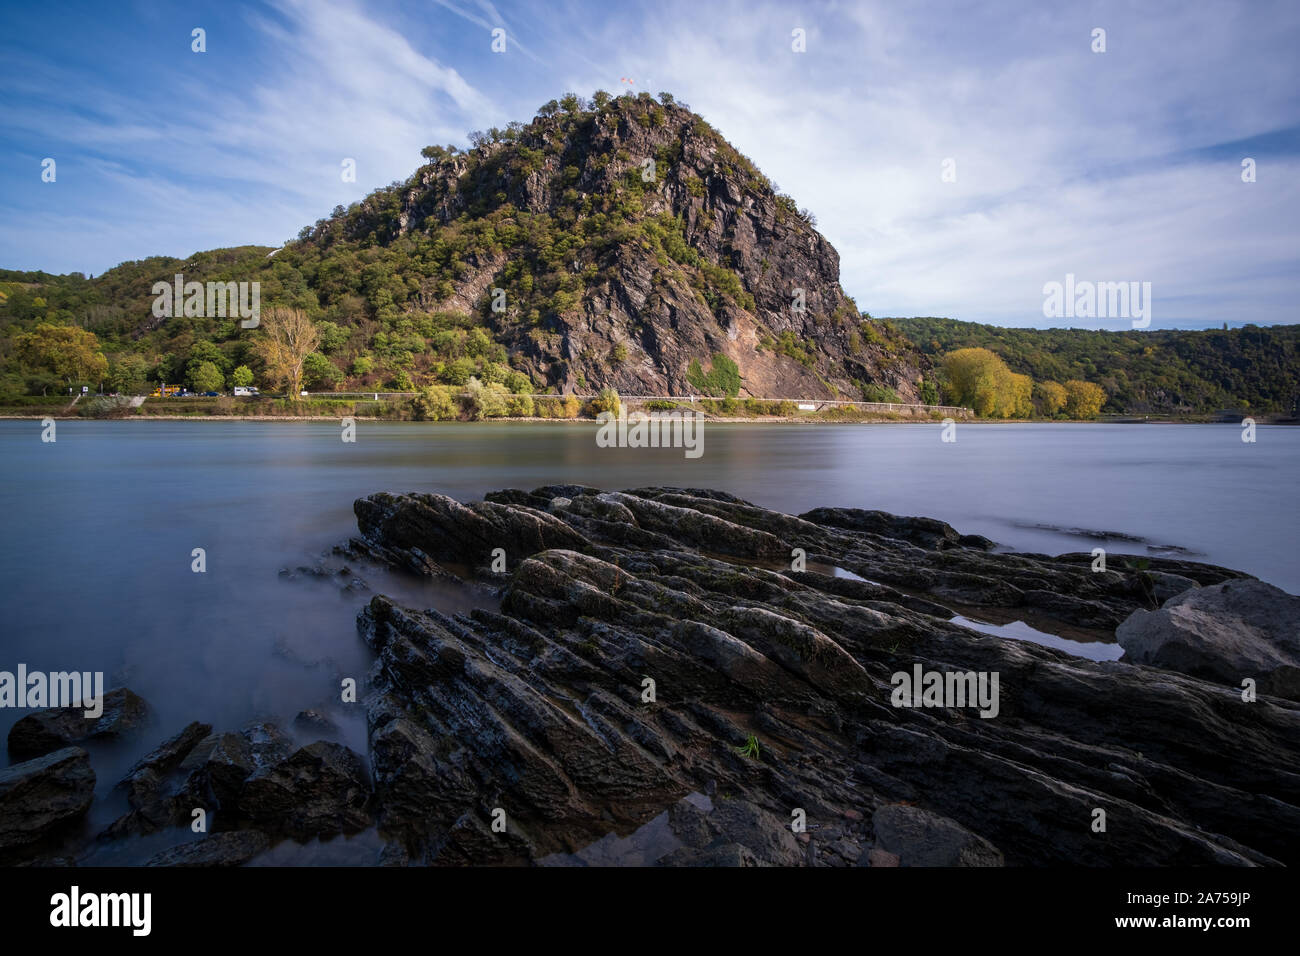 Dangerous rocks jut into the Rhine at the Rock of the Loreley, Rhine valley, Germany Stock Photo